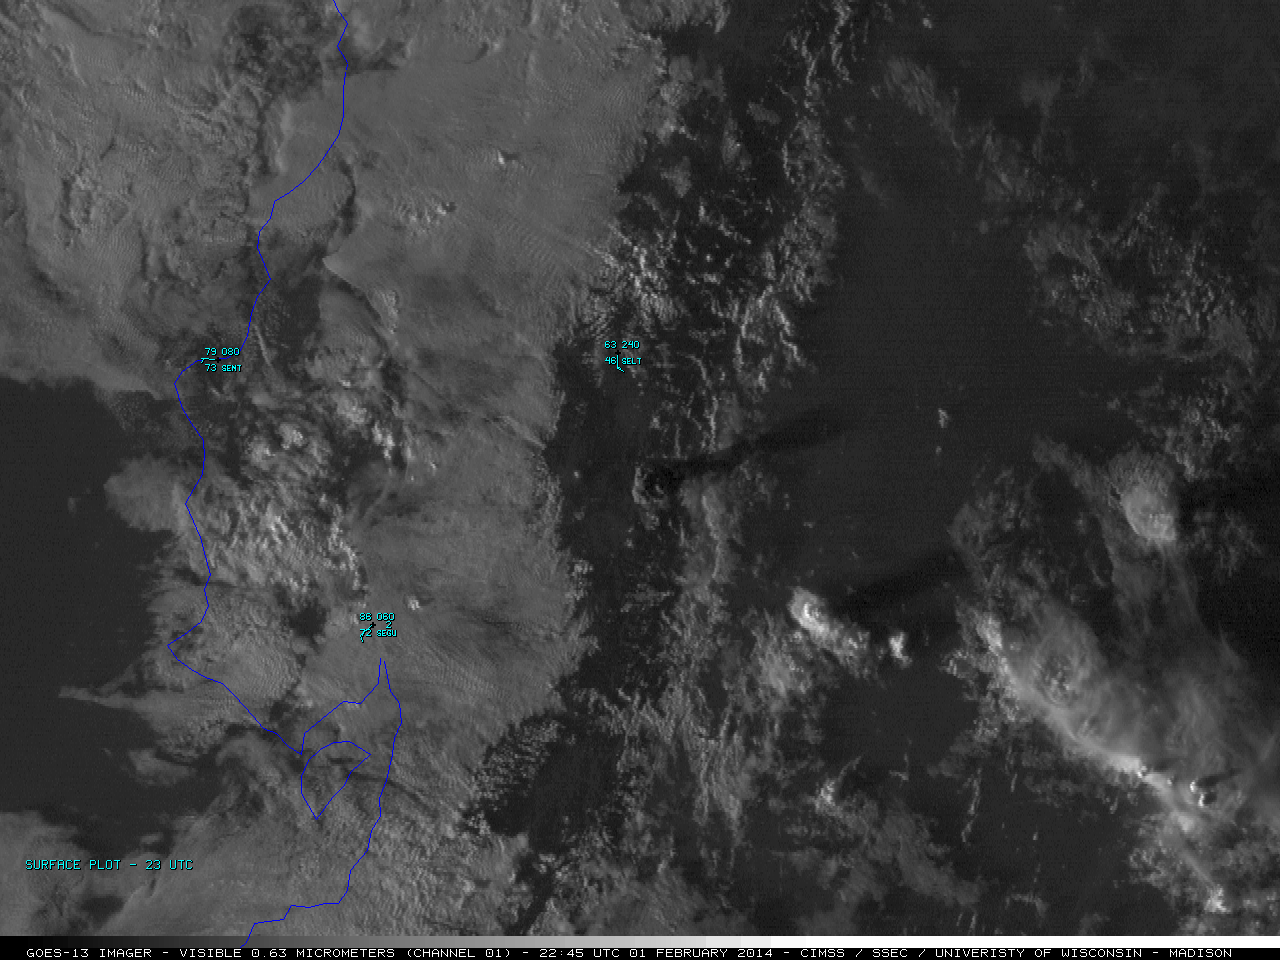 GOES-13 0.63 Âµm visible channel image